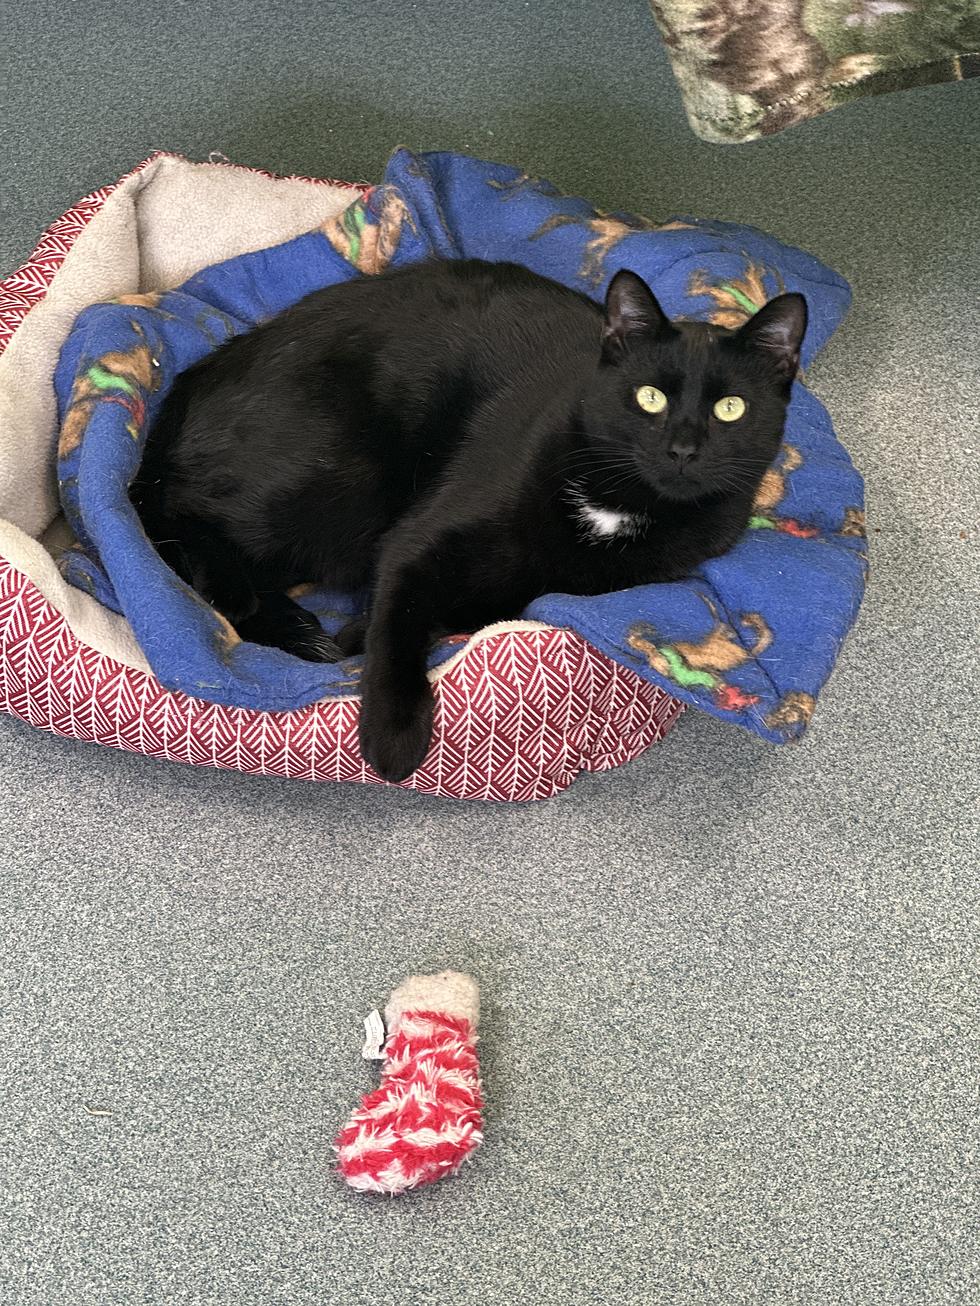 Check Out 'Sid' The Big Black Cat, Our 'Pet Of The Week'